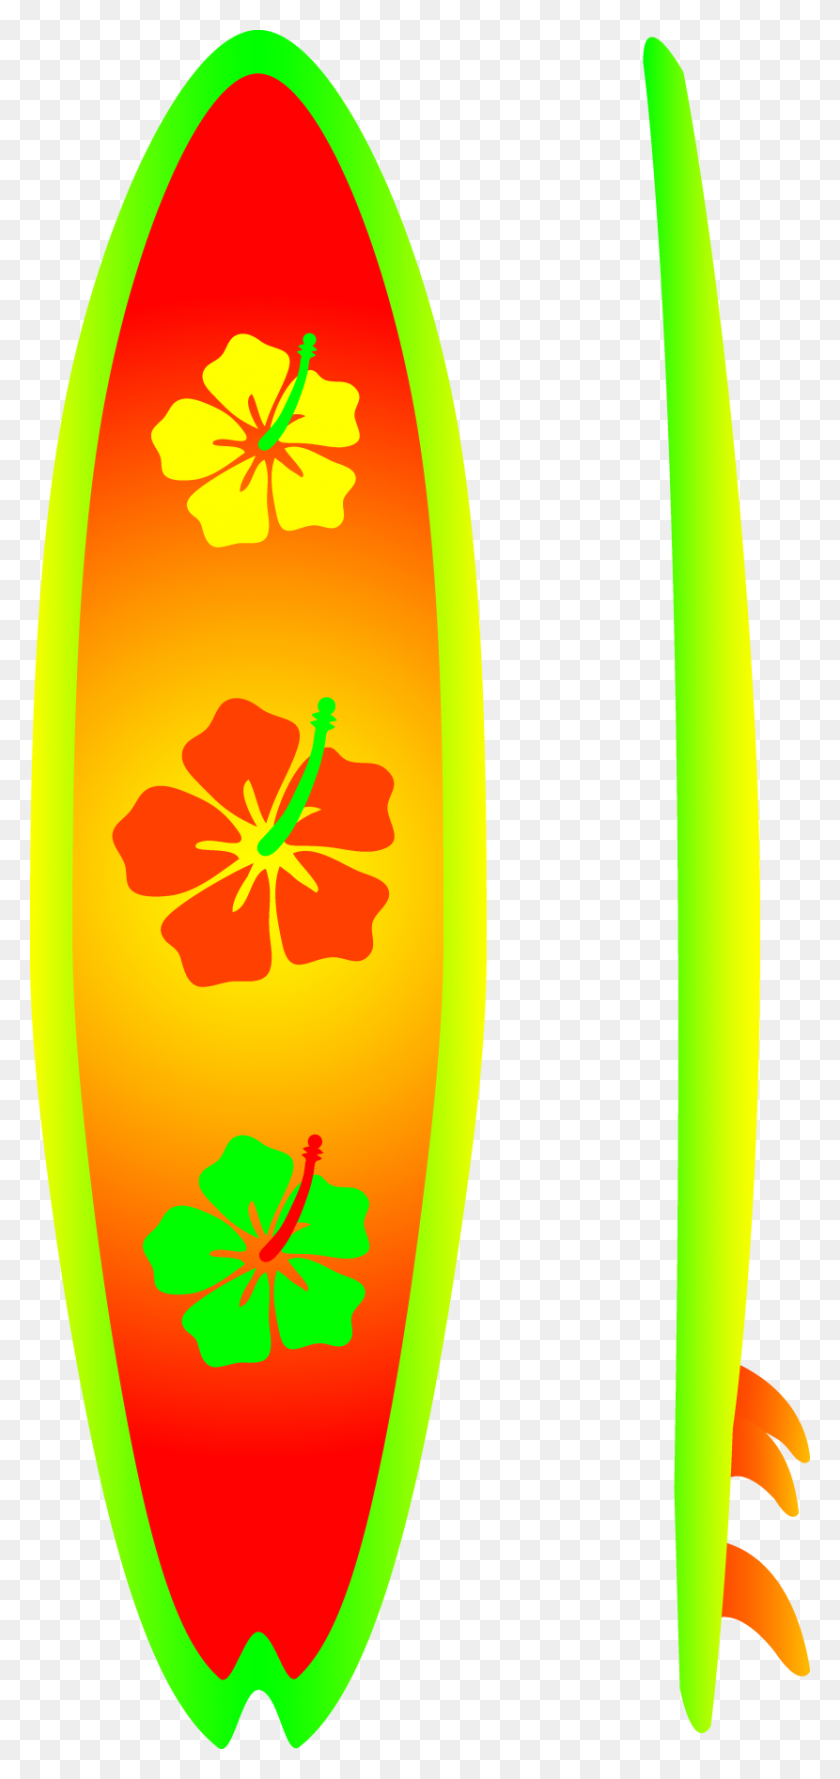 830x1830 Best Surfboard Clip Art - Surfboard Clipart Black And White